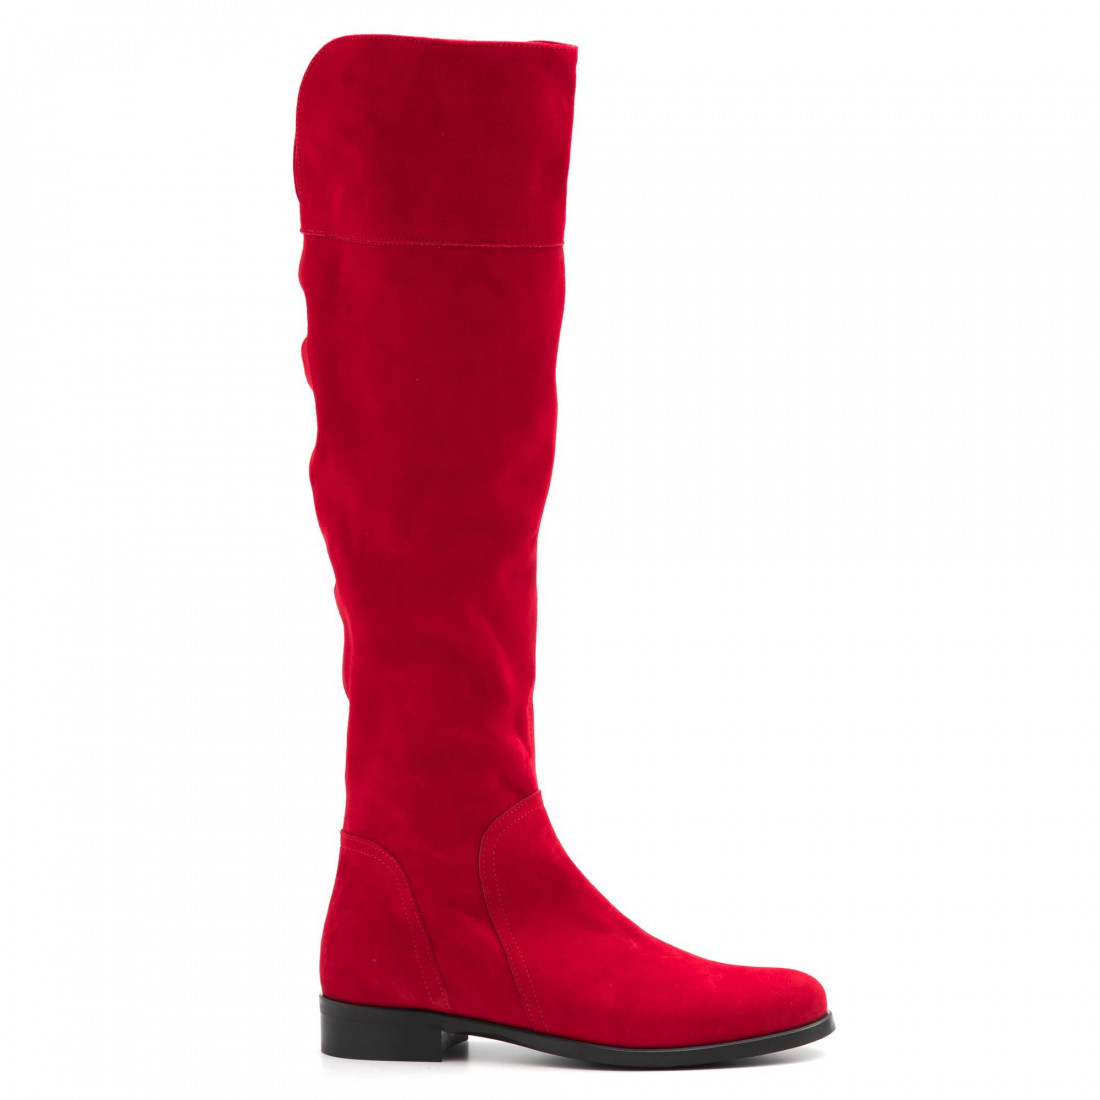 Over the knee boots in dark red suede